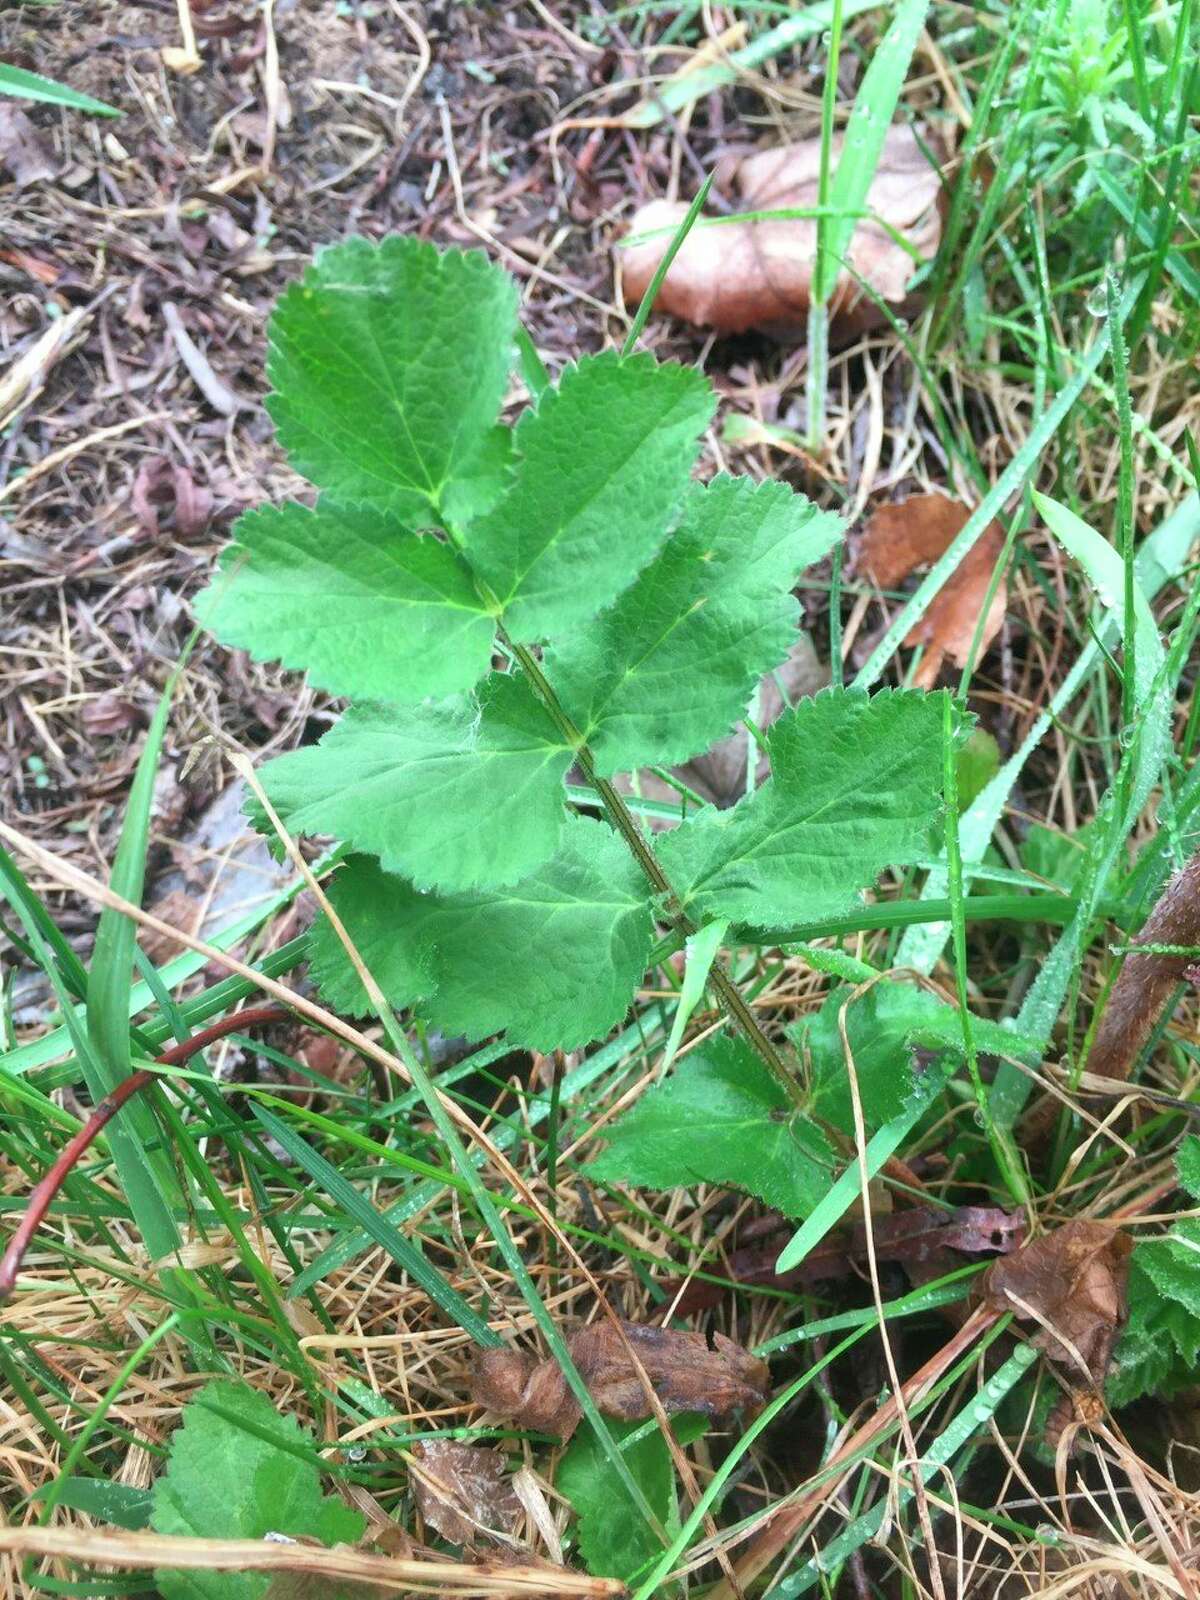 Wild parsnip can be identified by the toothed margins on the edges of the leaves. (Submitted photo)